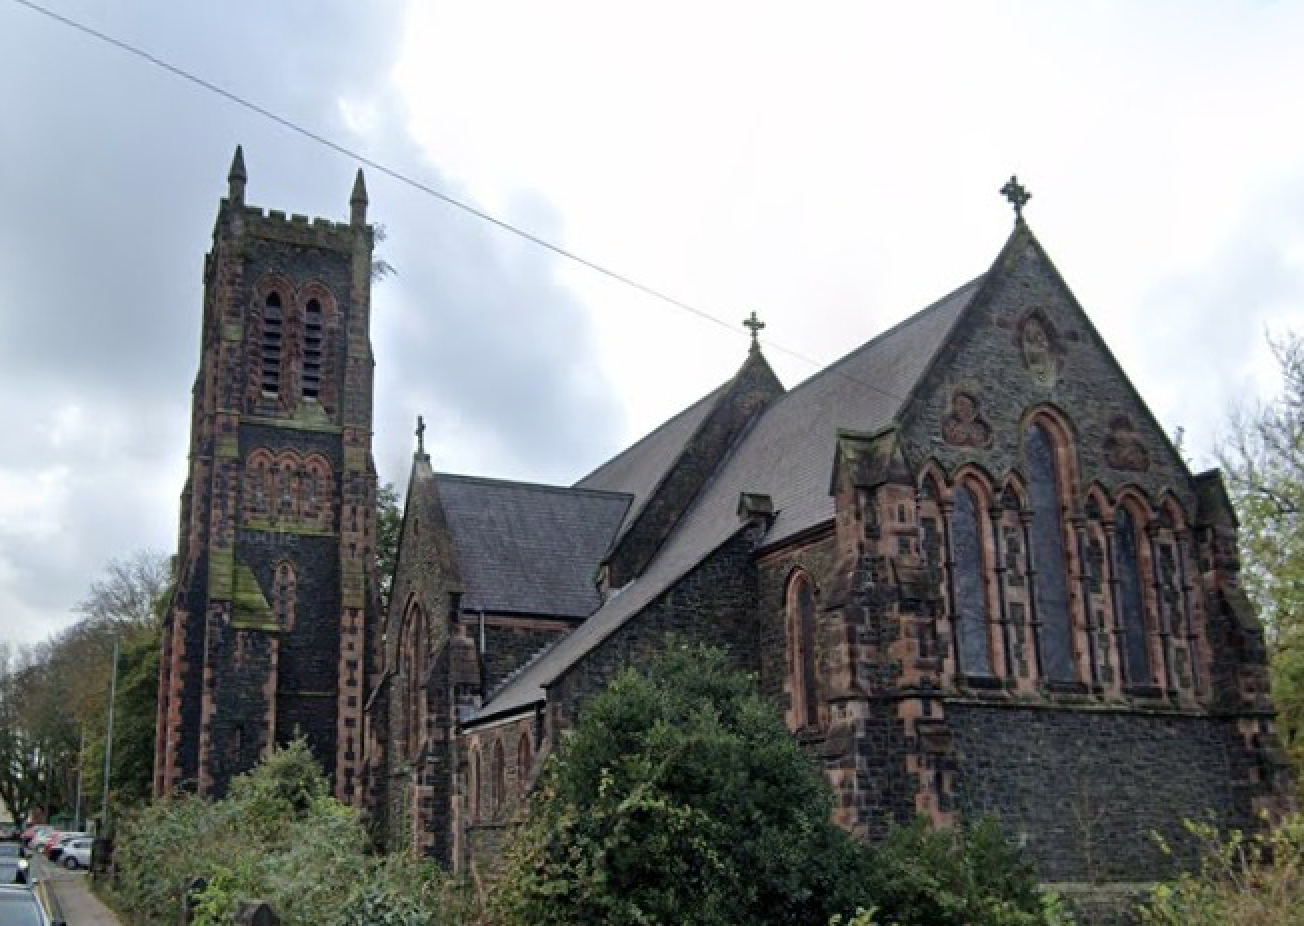 Items of heritage taken from Grade II listed church without planning permission